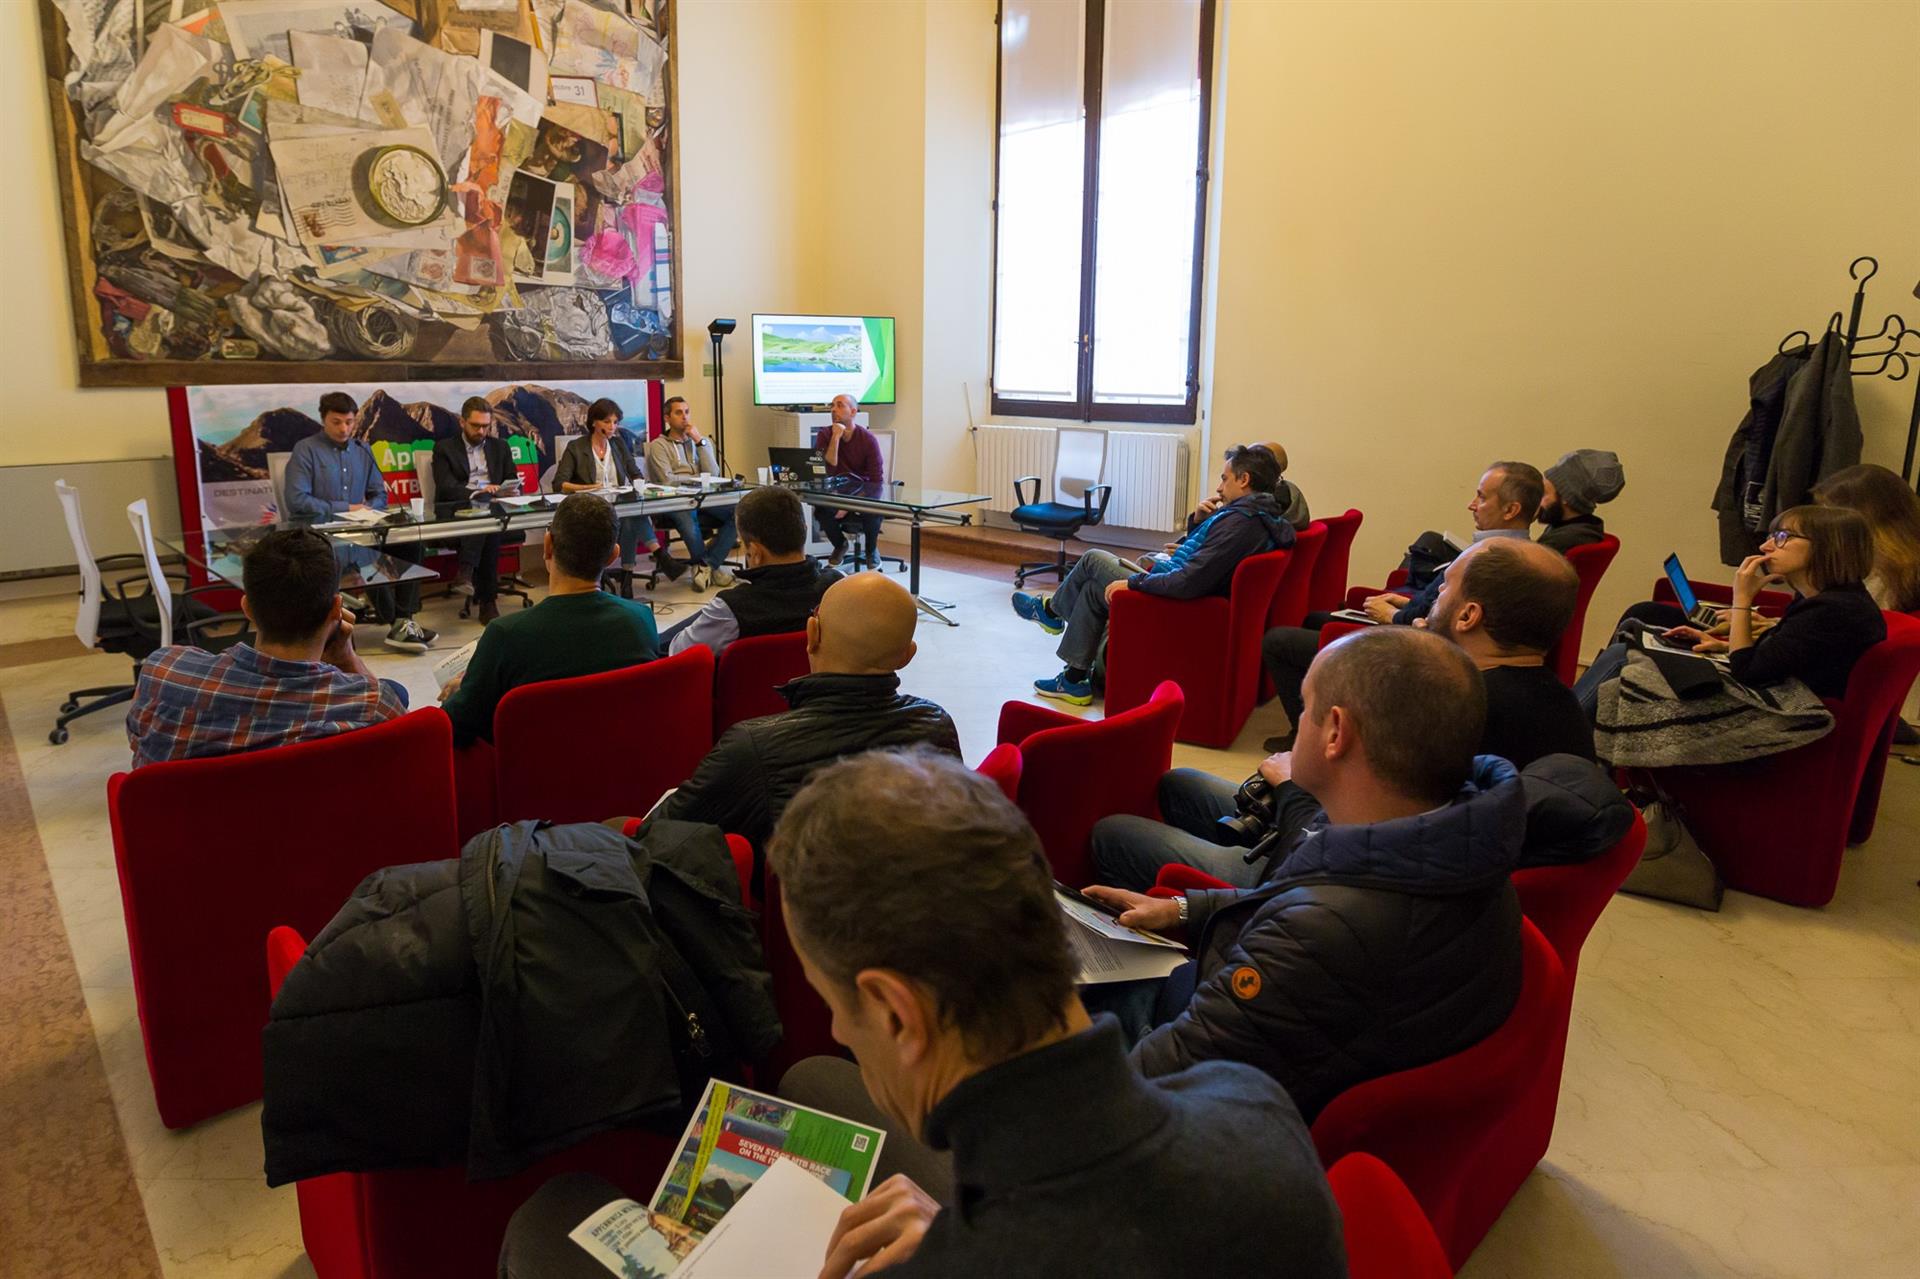 THE CITY OF BOLOGNA WILL PLAY HOST TO THE PROLOGUE OF THE 2019 EDITION OF APPENNINICA MTB STAGE RACE